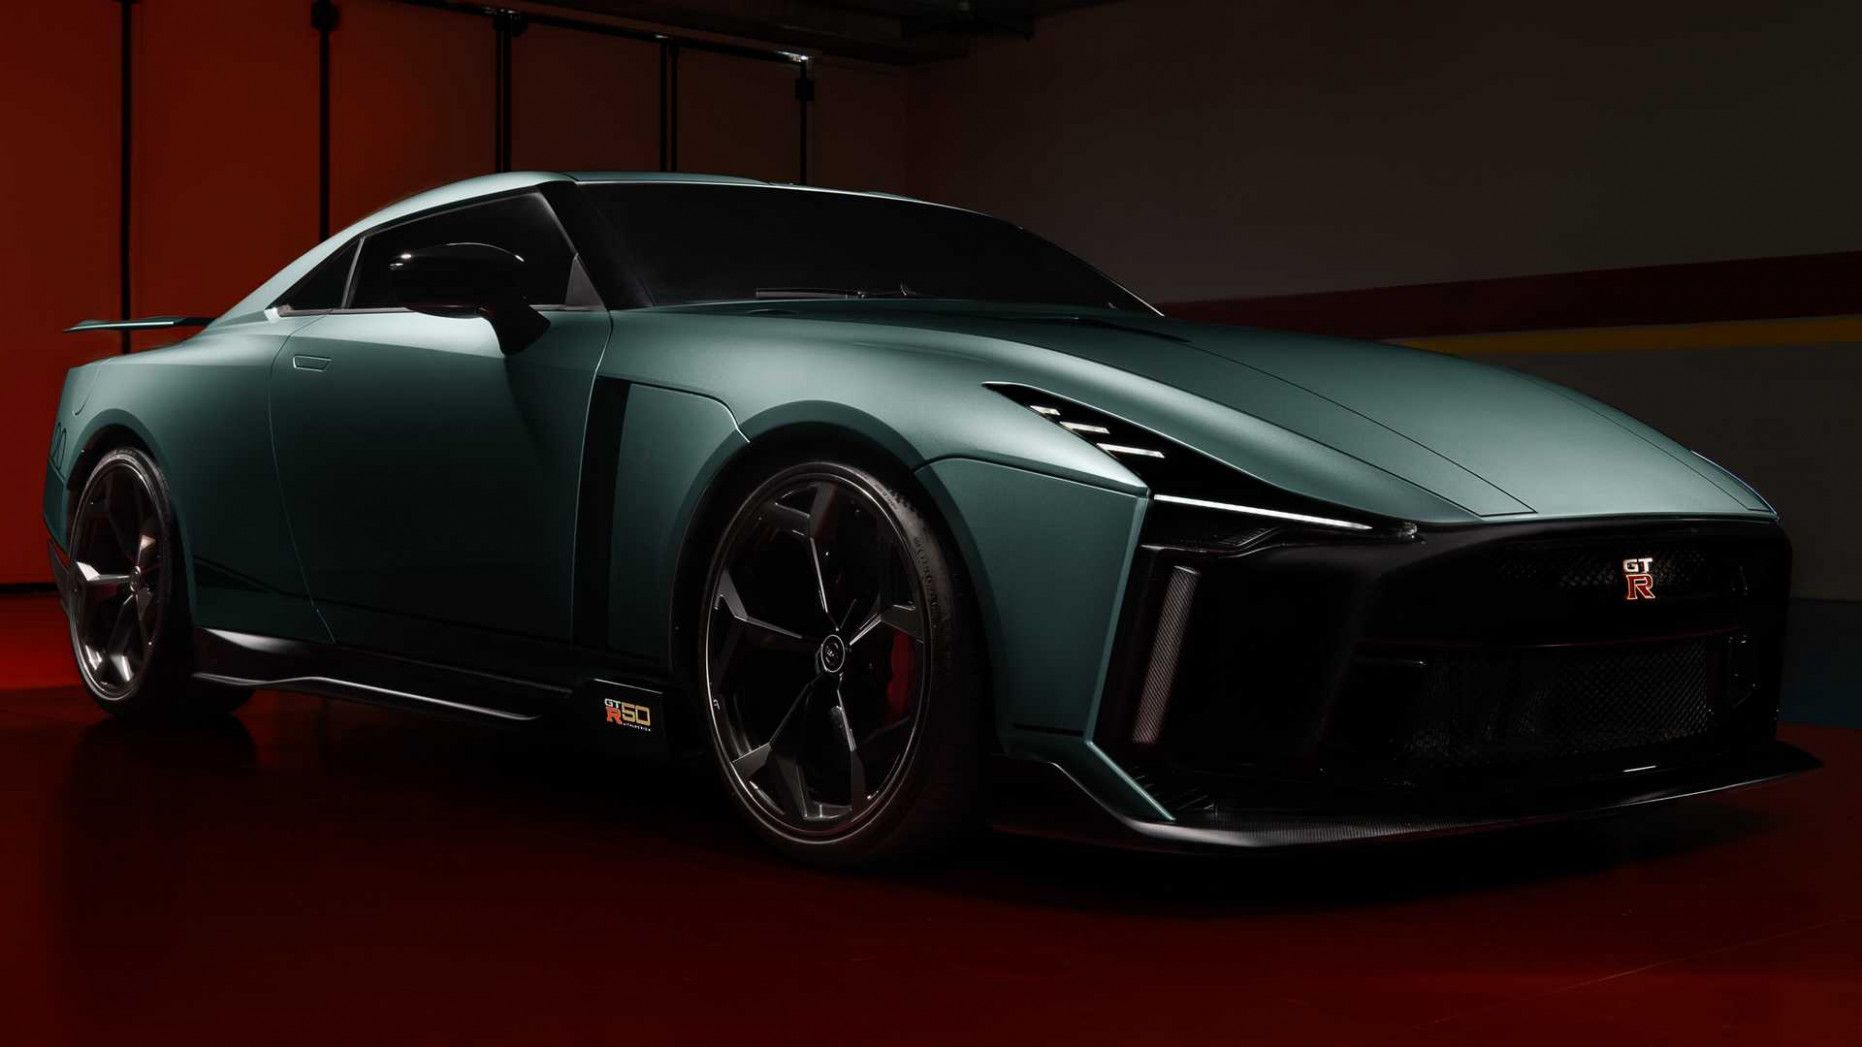 Nissan Indirectly Confirms Next Generation Gt R R4 Nissan Gtr 2023 Concept